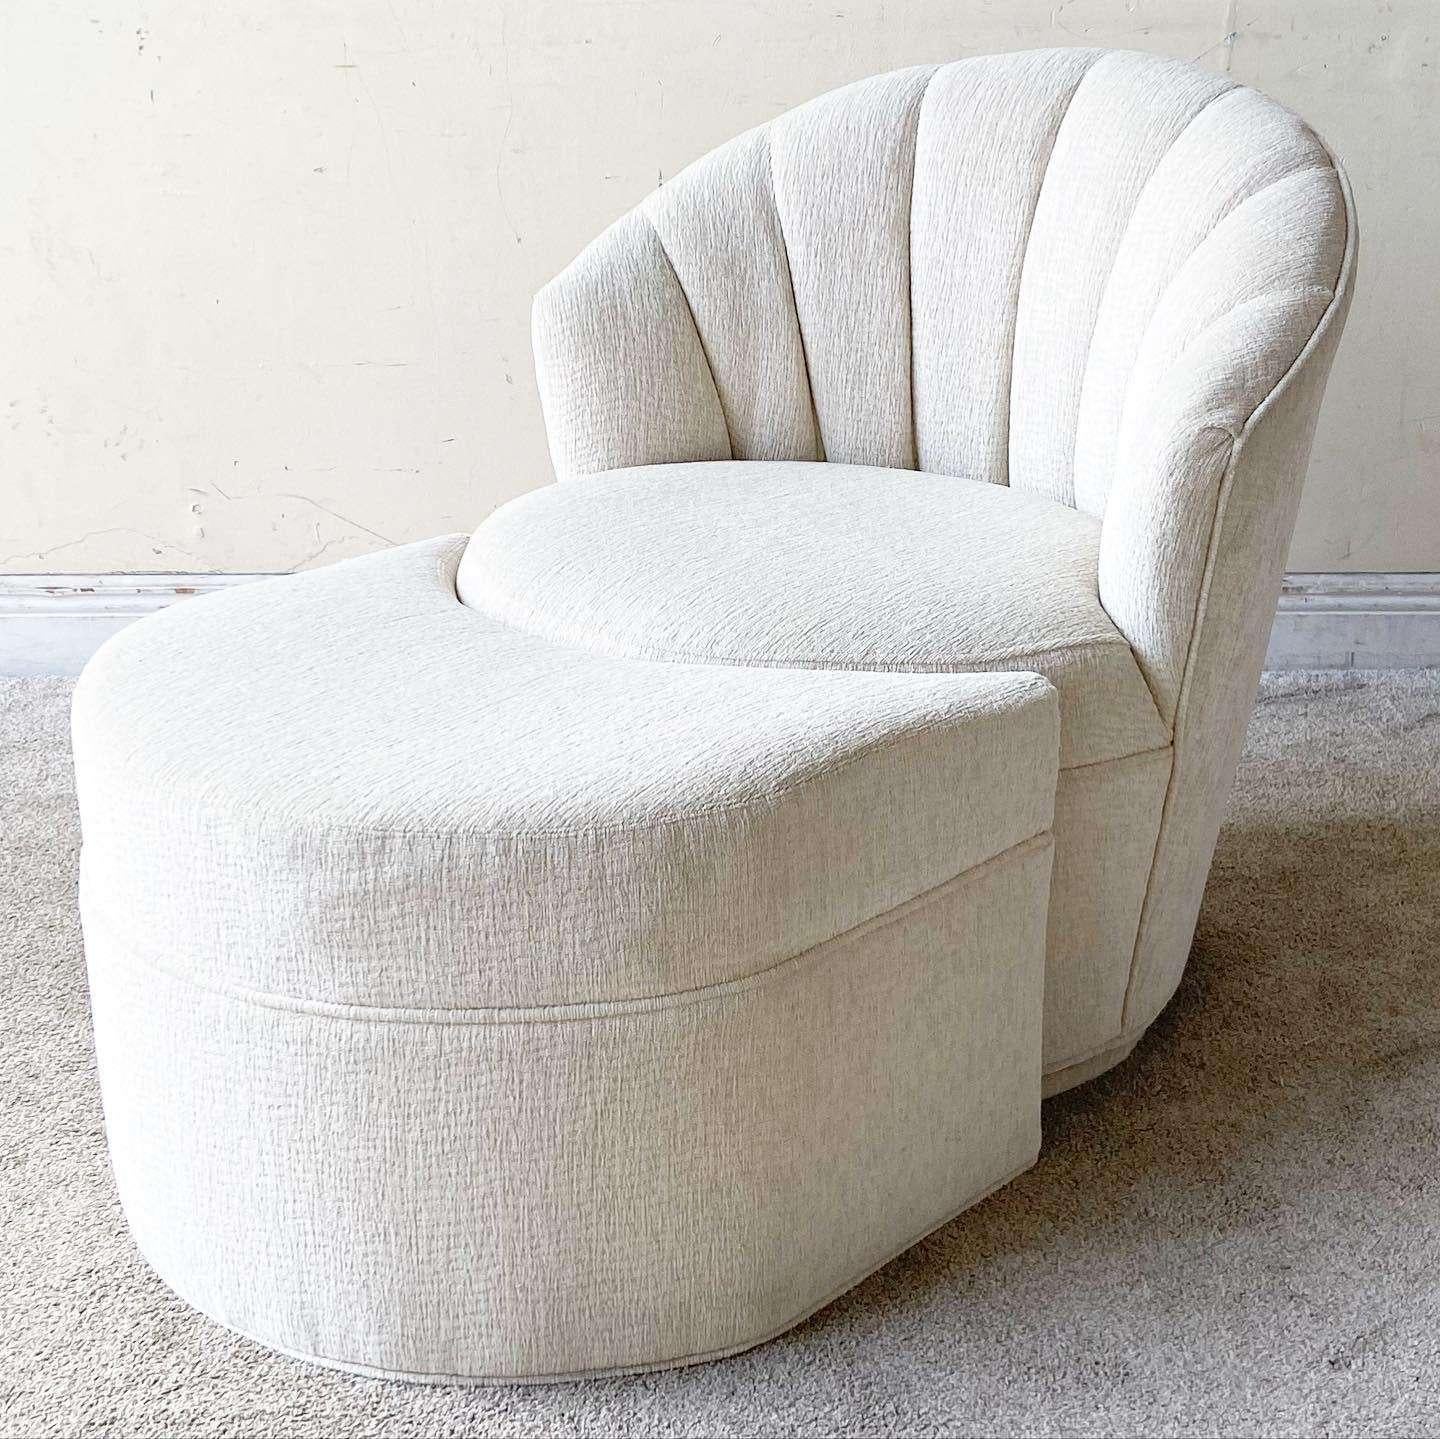 Amazing vintage postmodern white fabric swivel chair with a nesting, crescent shaped foot rest/ottoman. Features a clam shell channeled backrest.

Foot rest measures 26”W, 22”D, 16.5”H

Seat height is 17.5 in